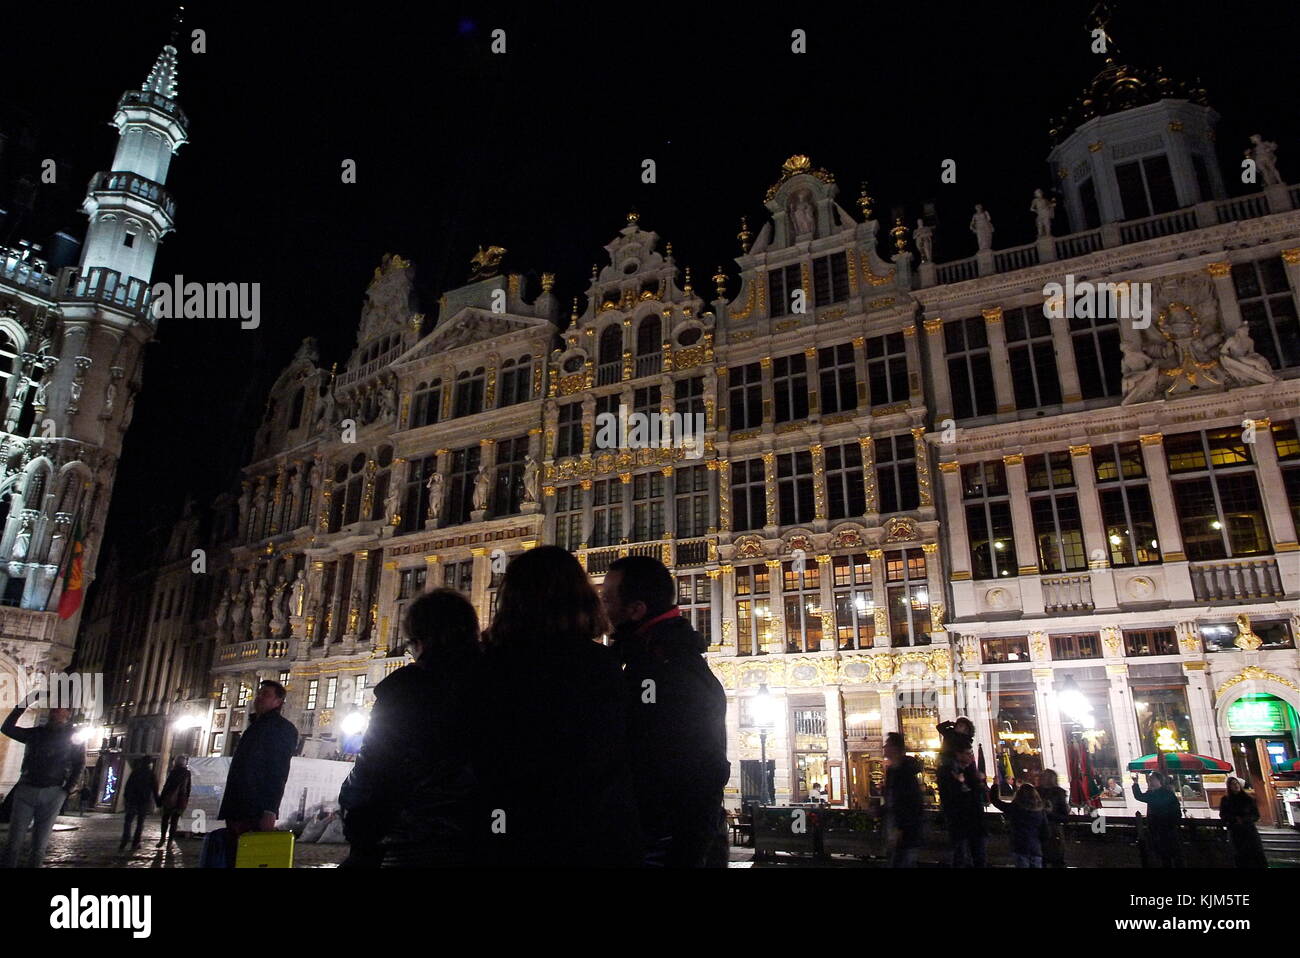 Nightl view of Grote Markt - Grand-Place - central square of, Brussels, Belgium Stock Photo